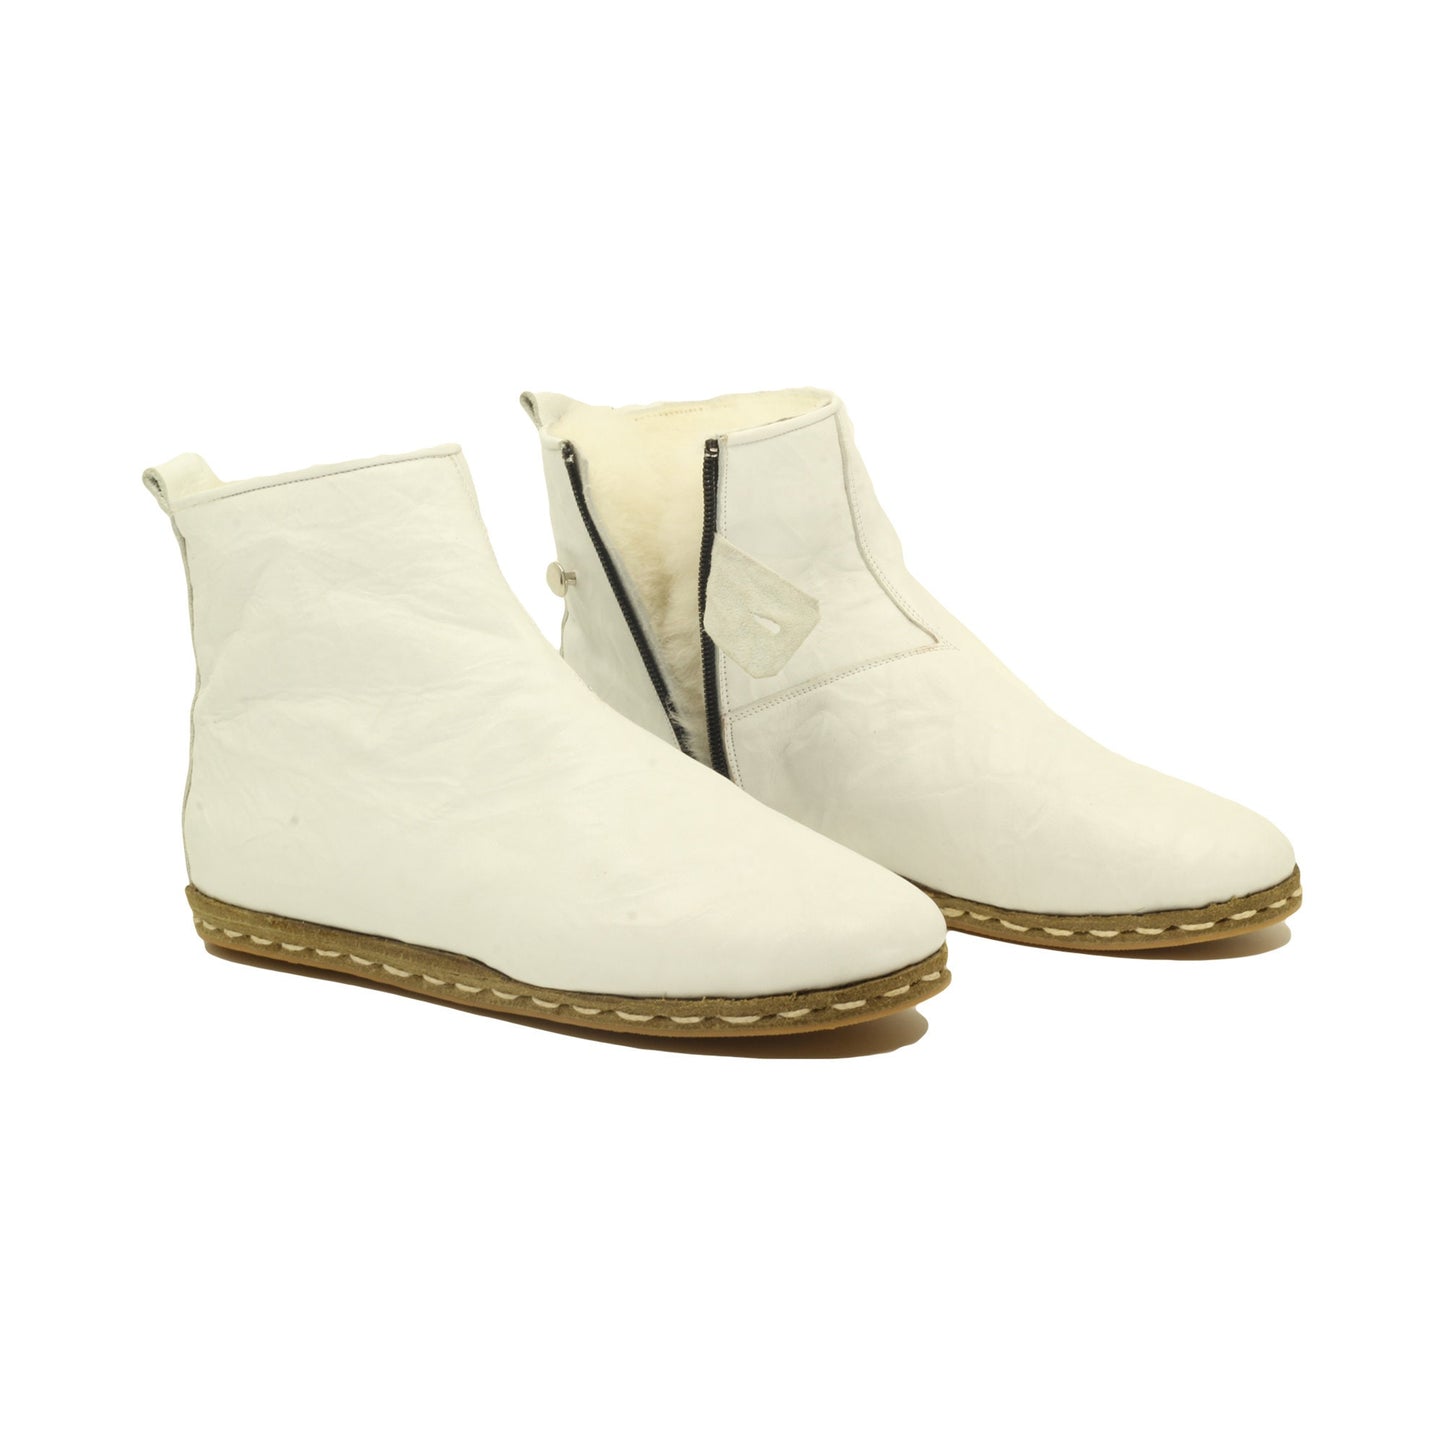 Women's Boot, Real Tuscan Fur Inside, All Leather. White